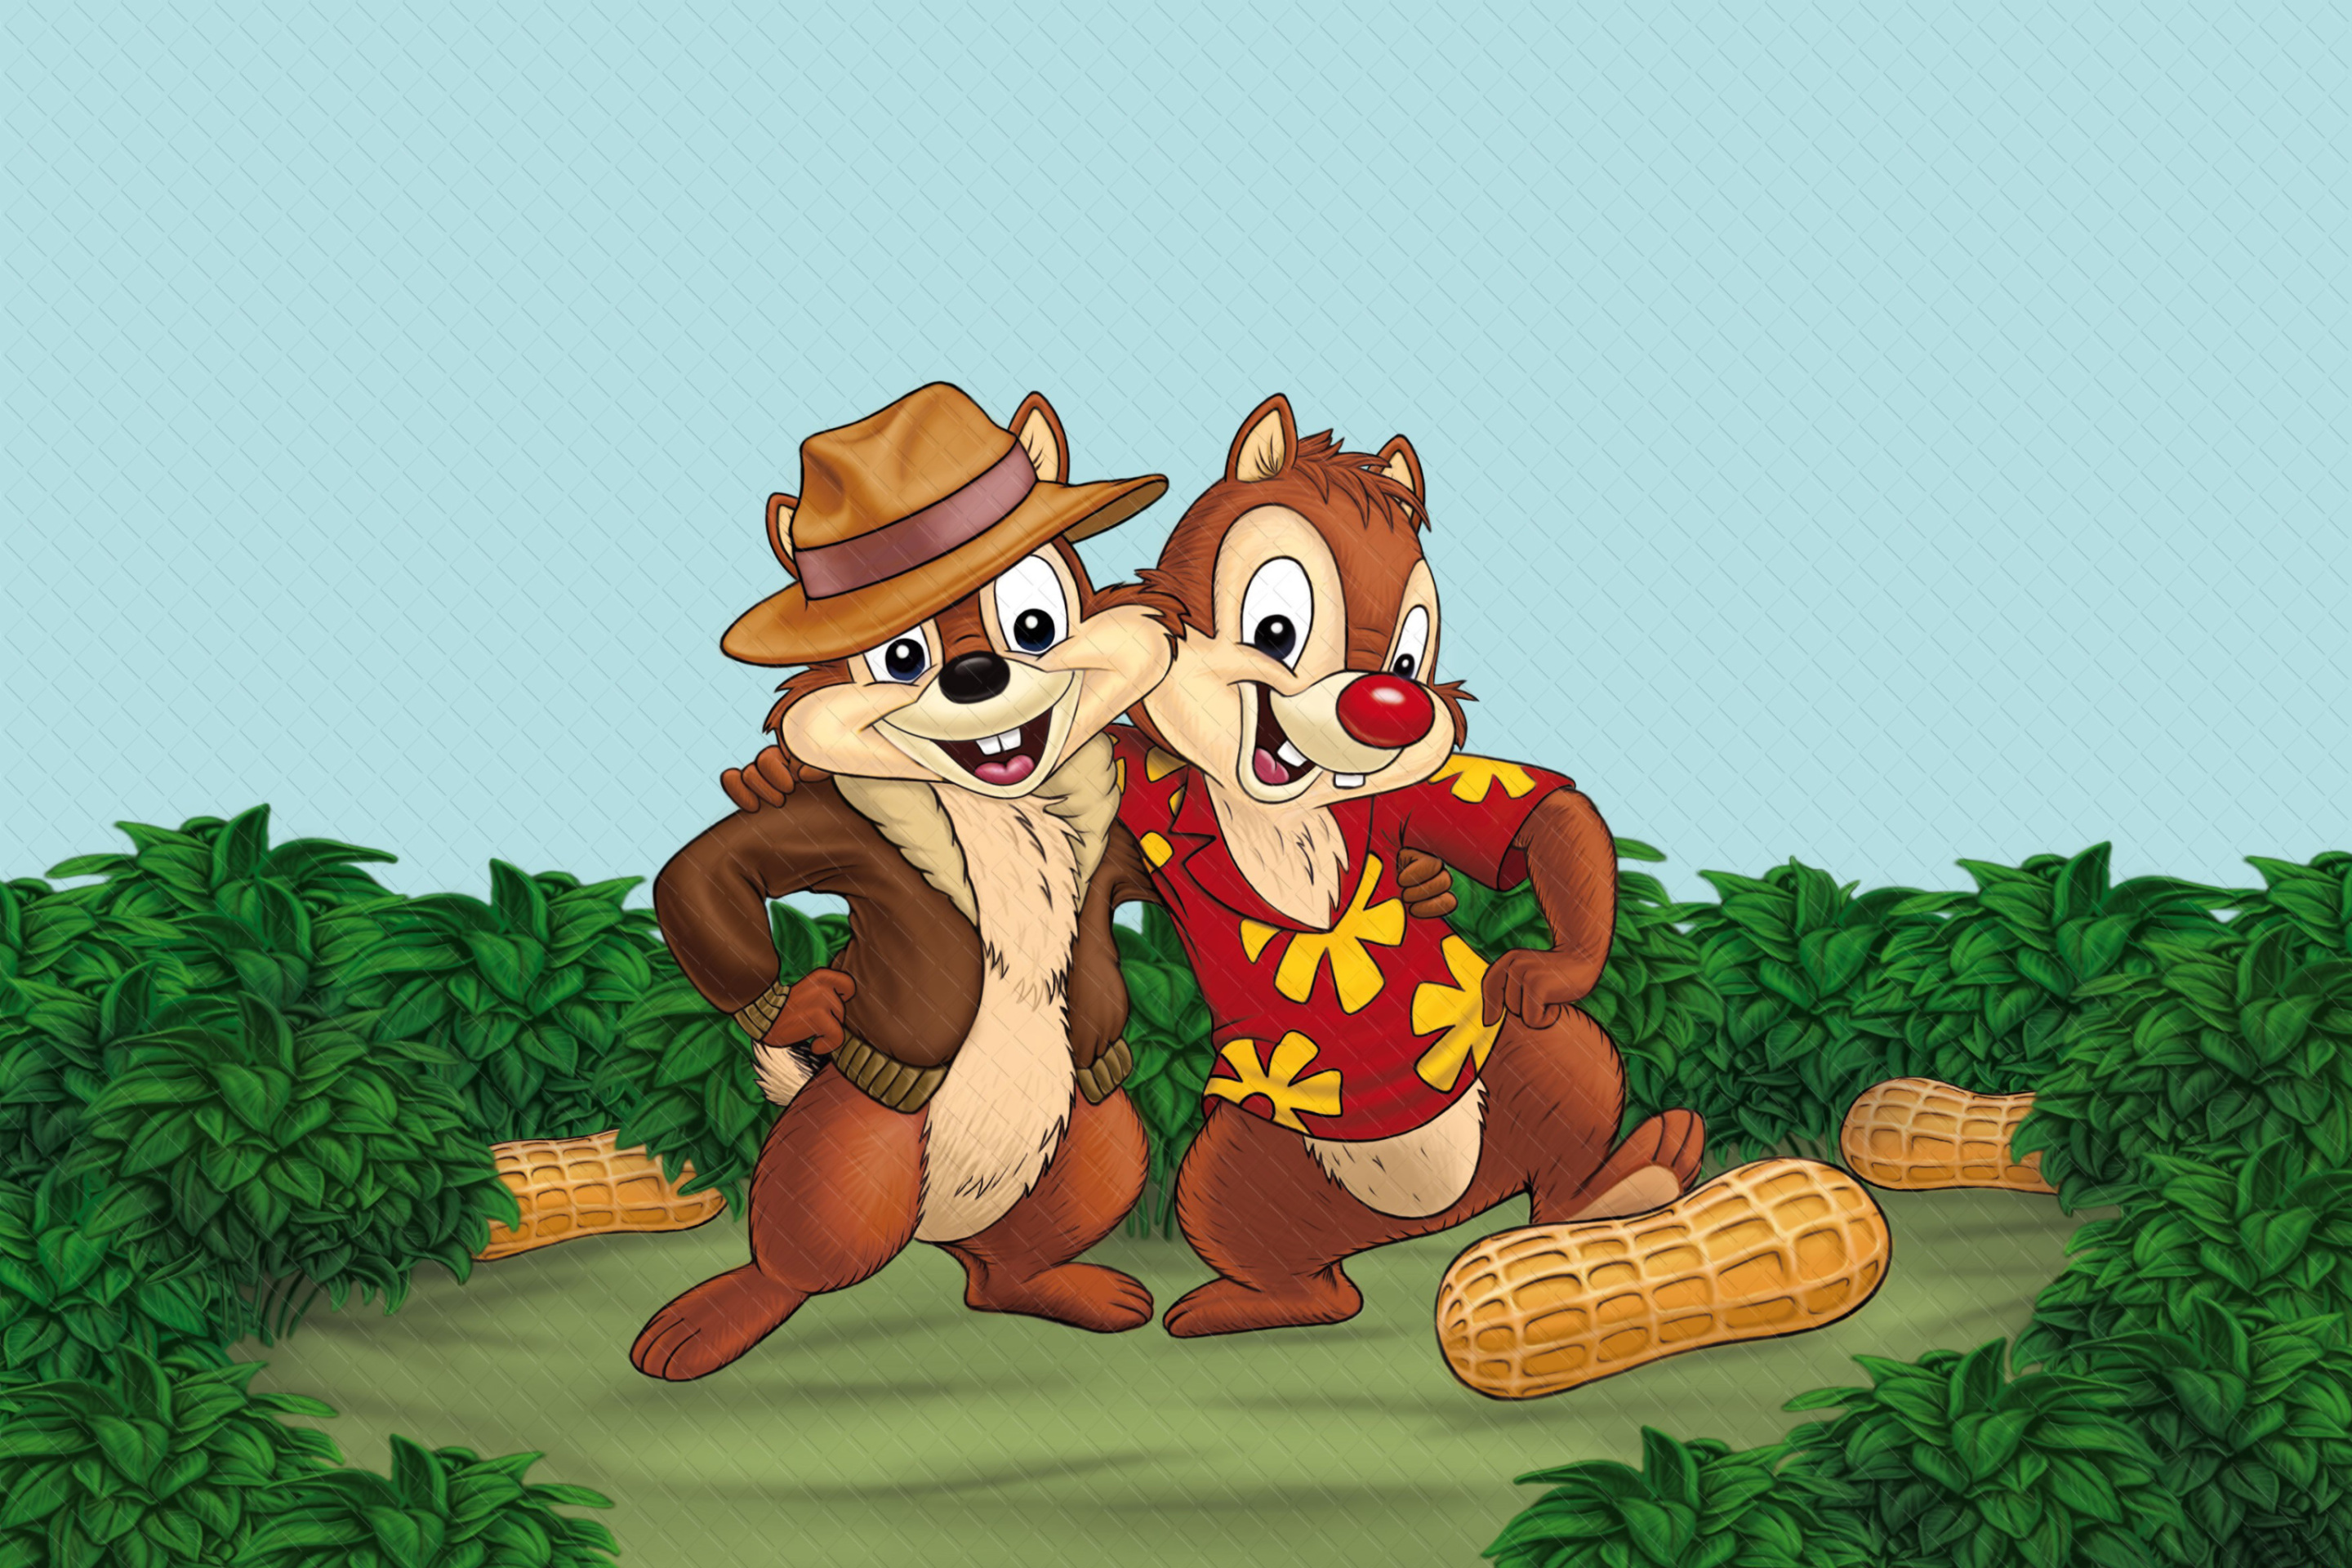 Das Chip and Dale Rescue Rangers 3 Wallpaper 2880x1920